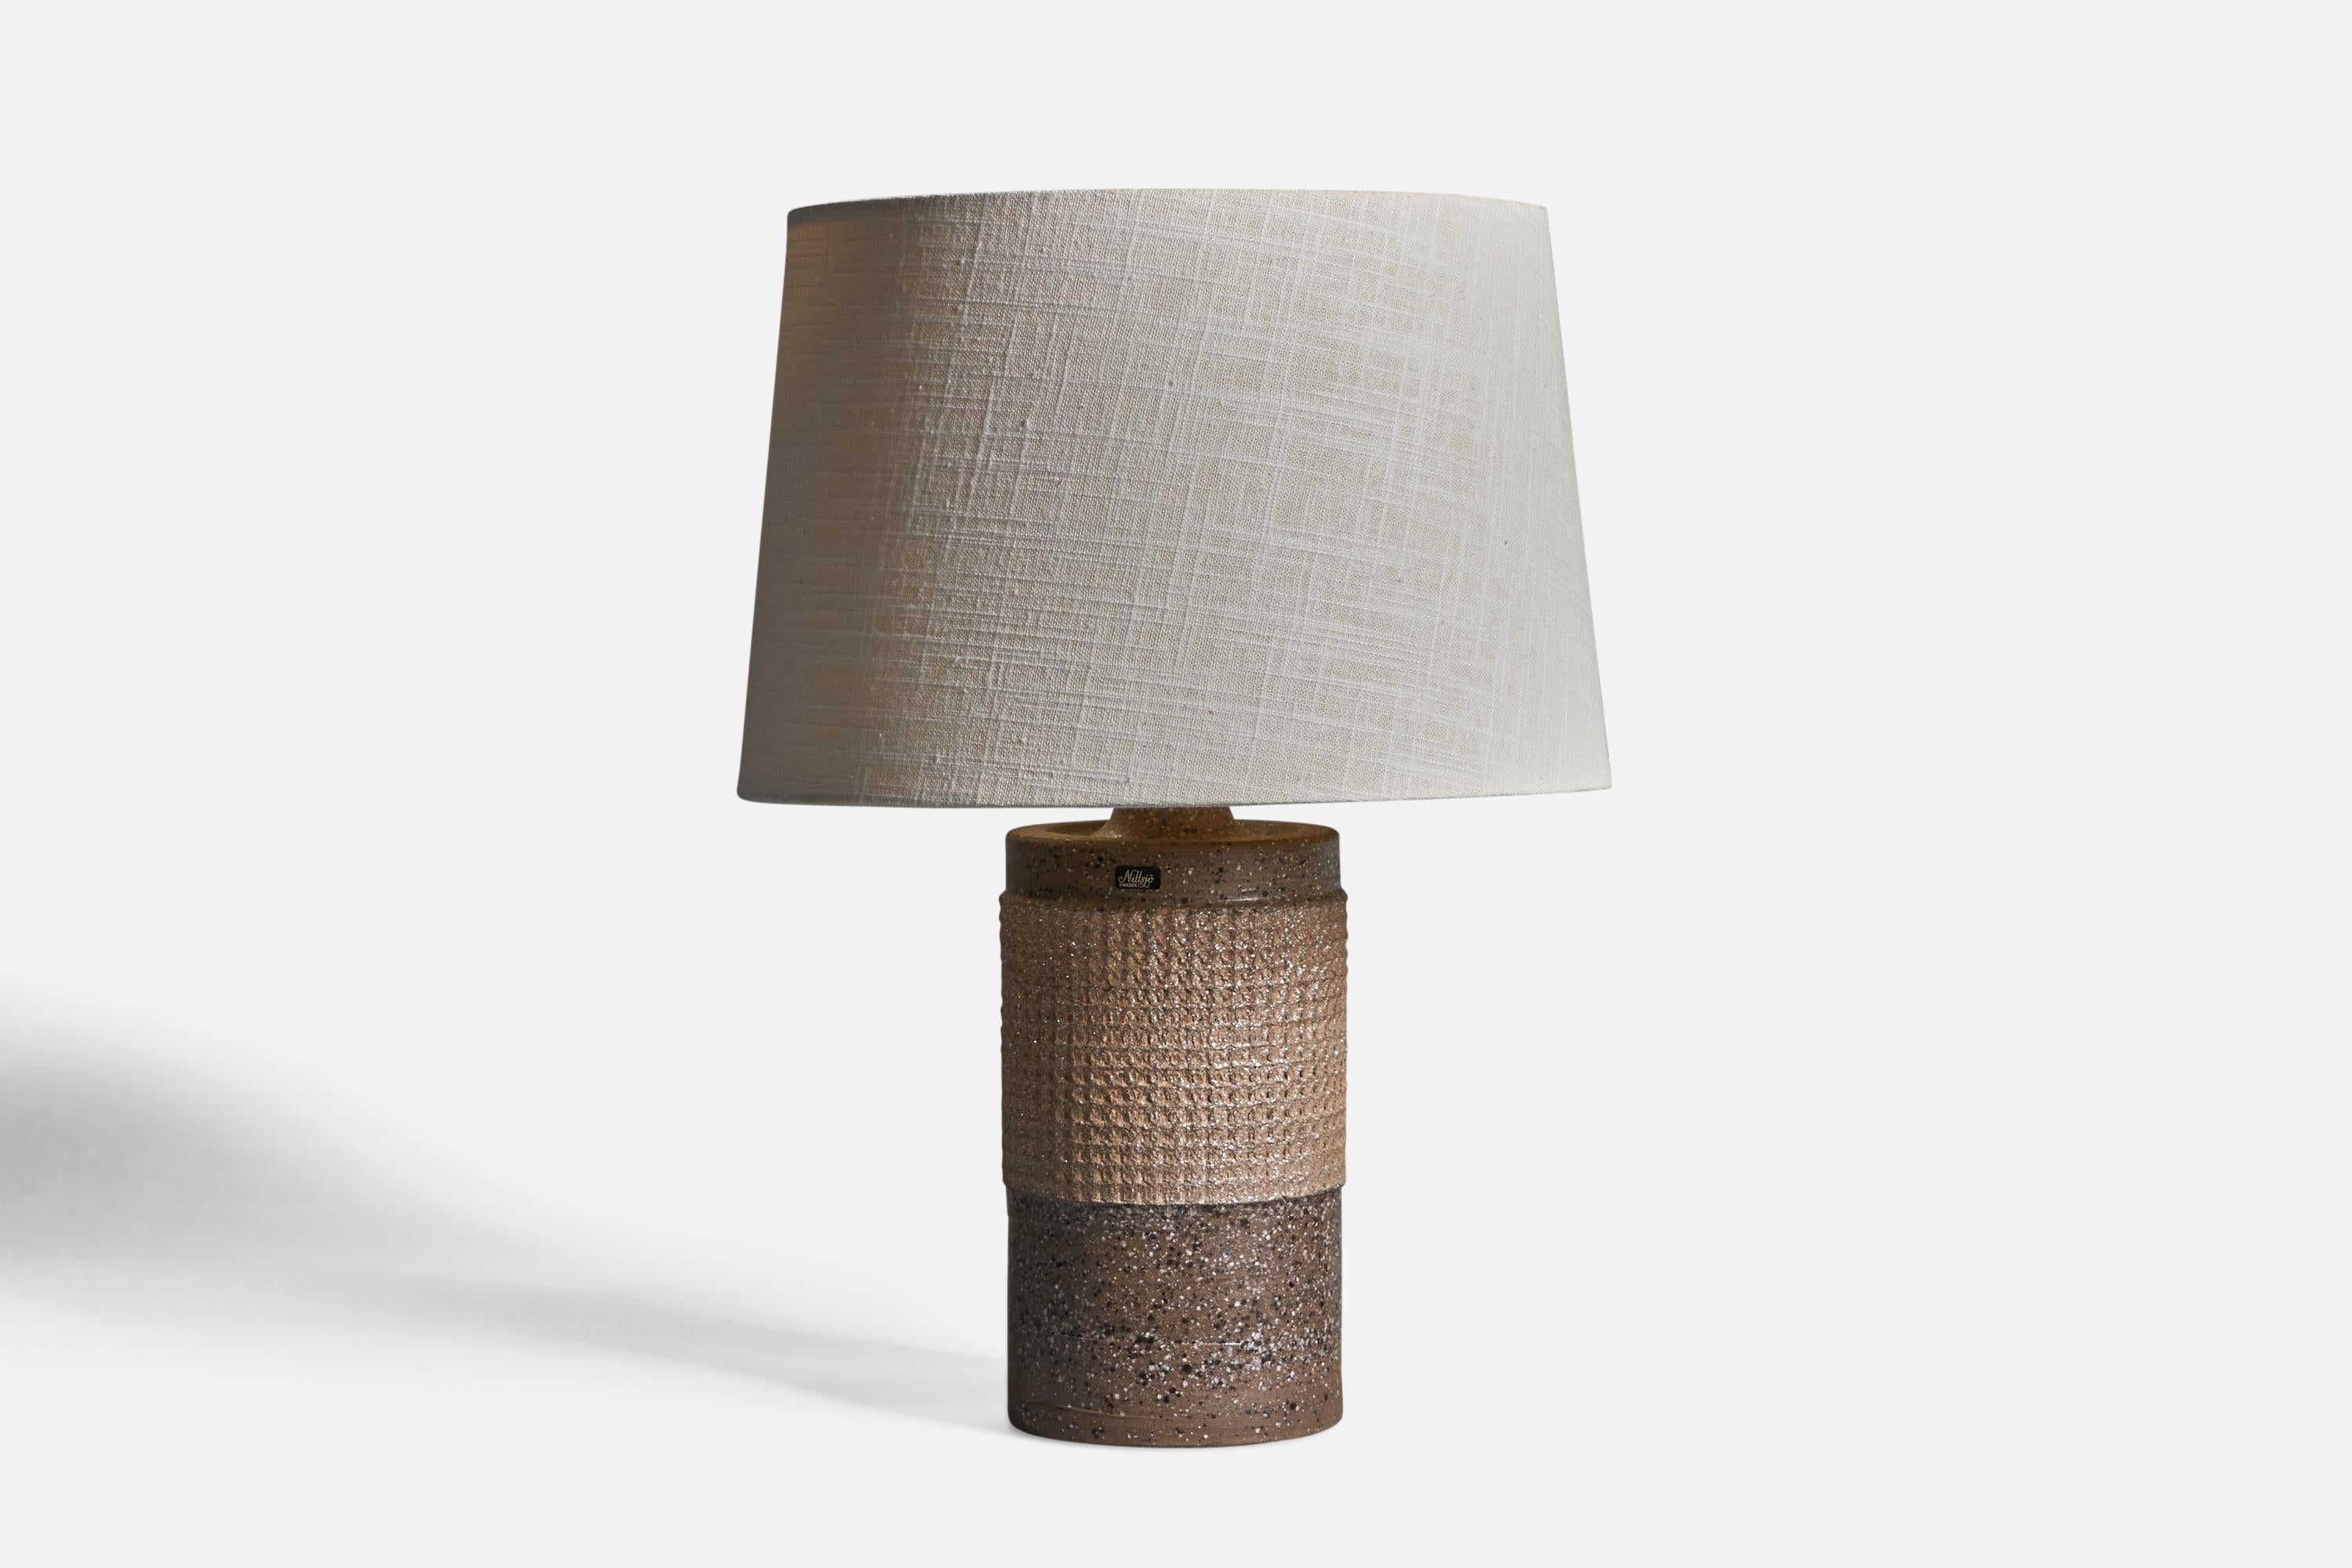 A incised grey stoneware table lamp, designed by Thomas Hellström and produced by Nittsjö, Sweden, c. 1950s.

Overall Dimensions (inches): 16.75